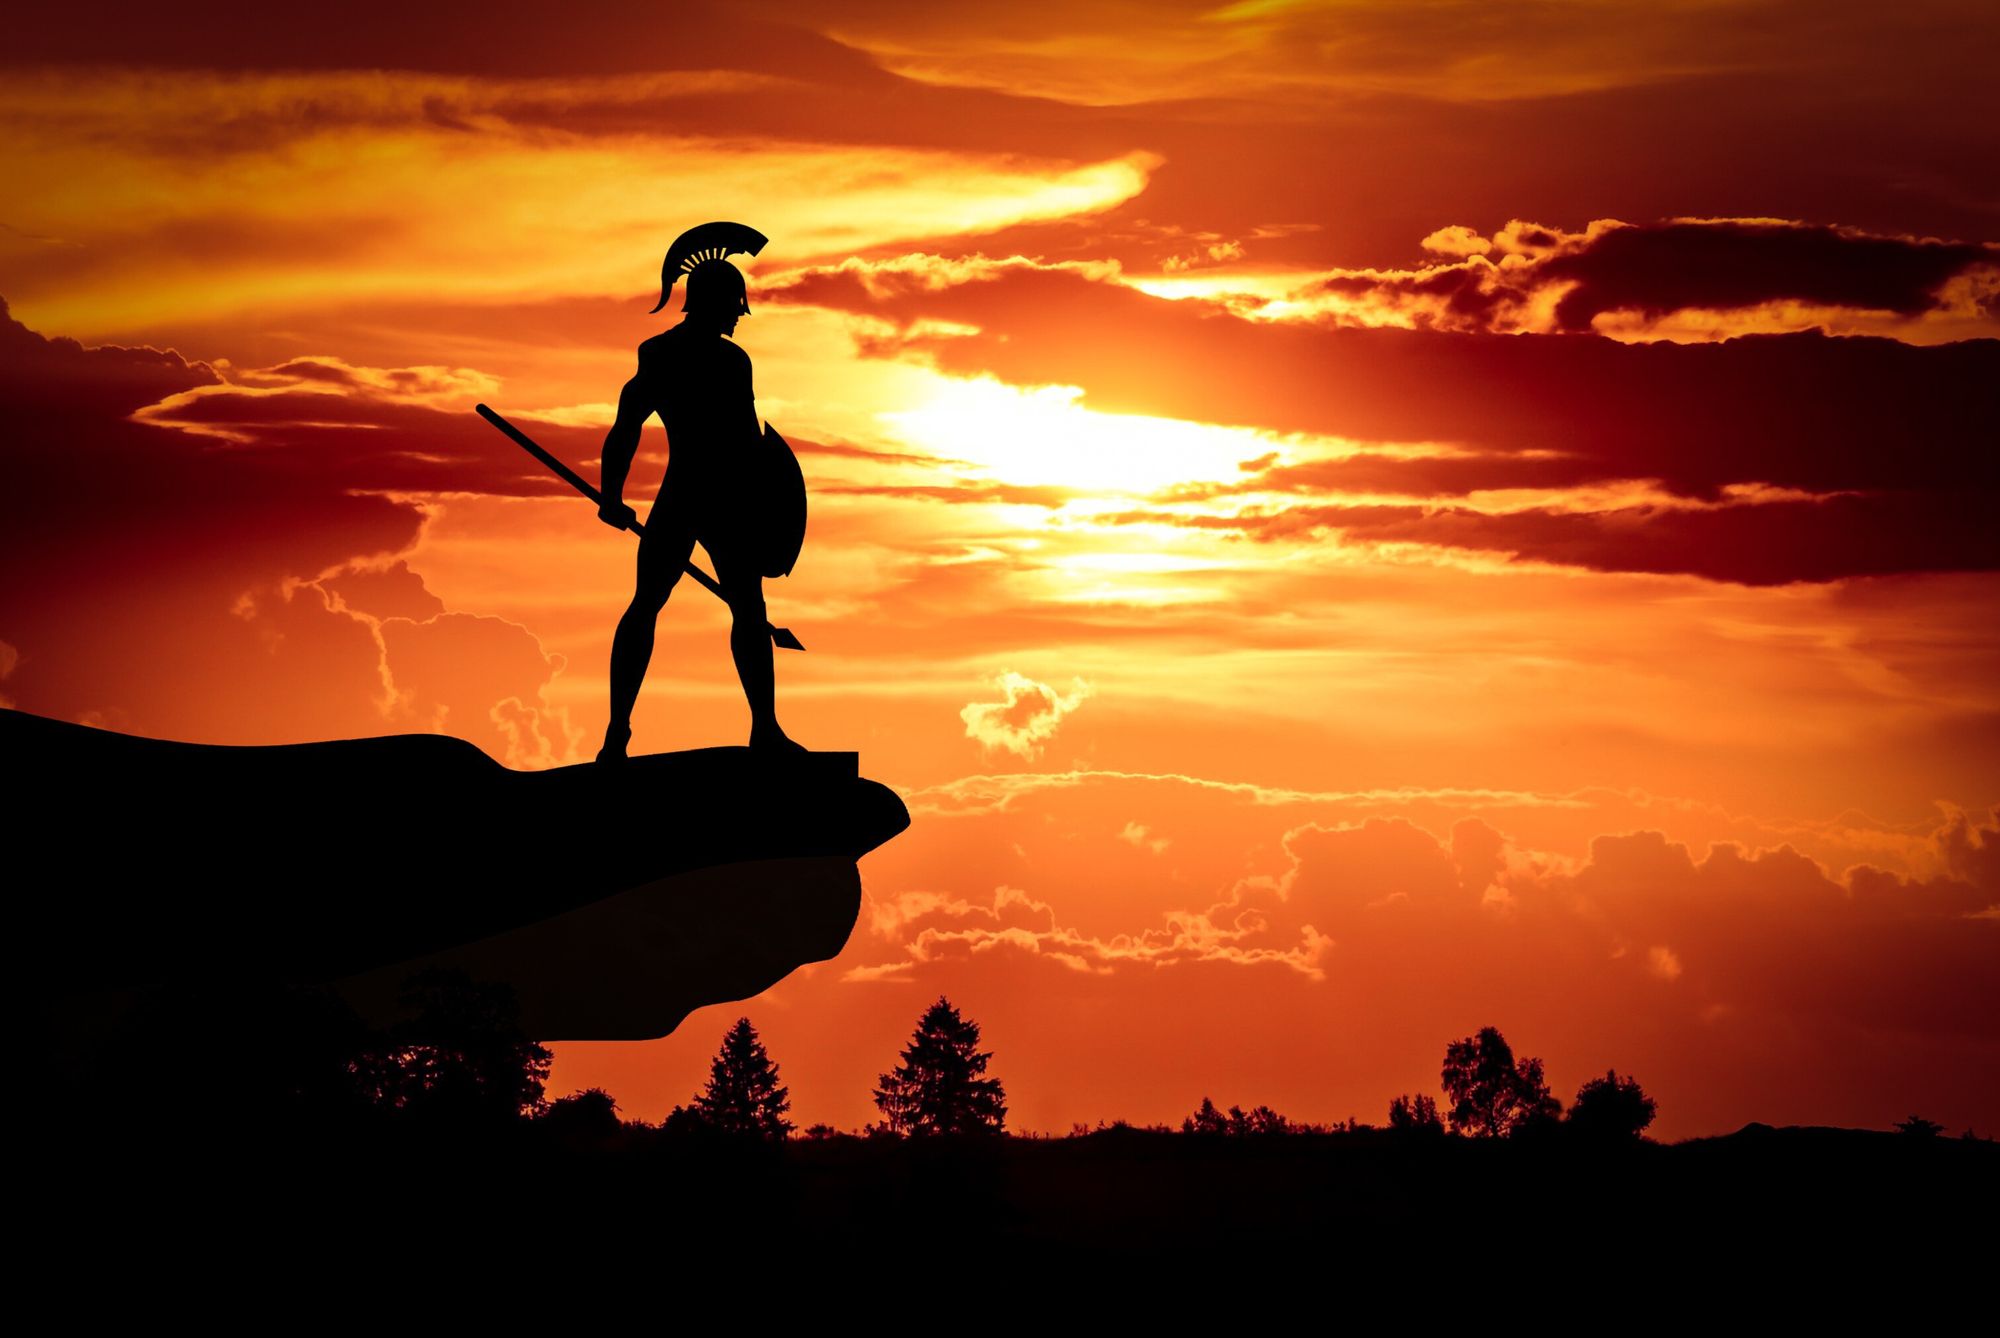 A spartan standing on a cliff rock with a sunset background.